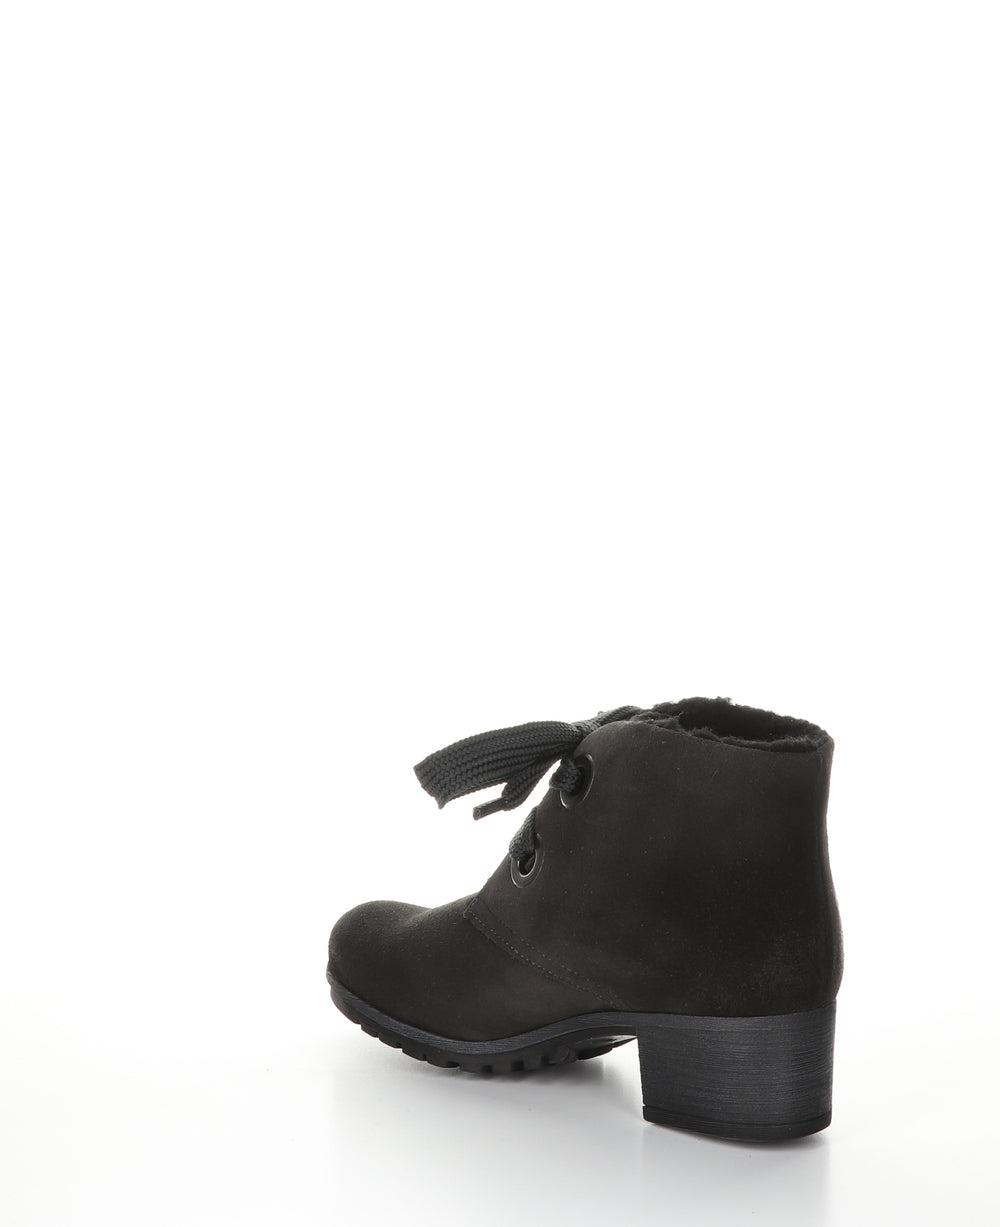 MANX Black Round Toe Ankle Boots|MANX Bottines à Bout Rond in Noir